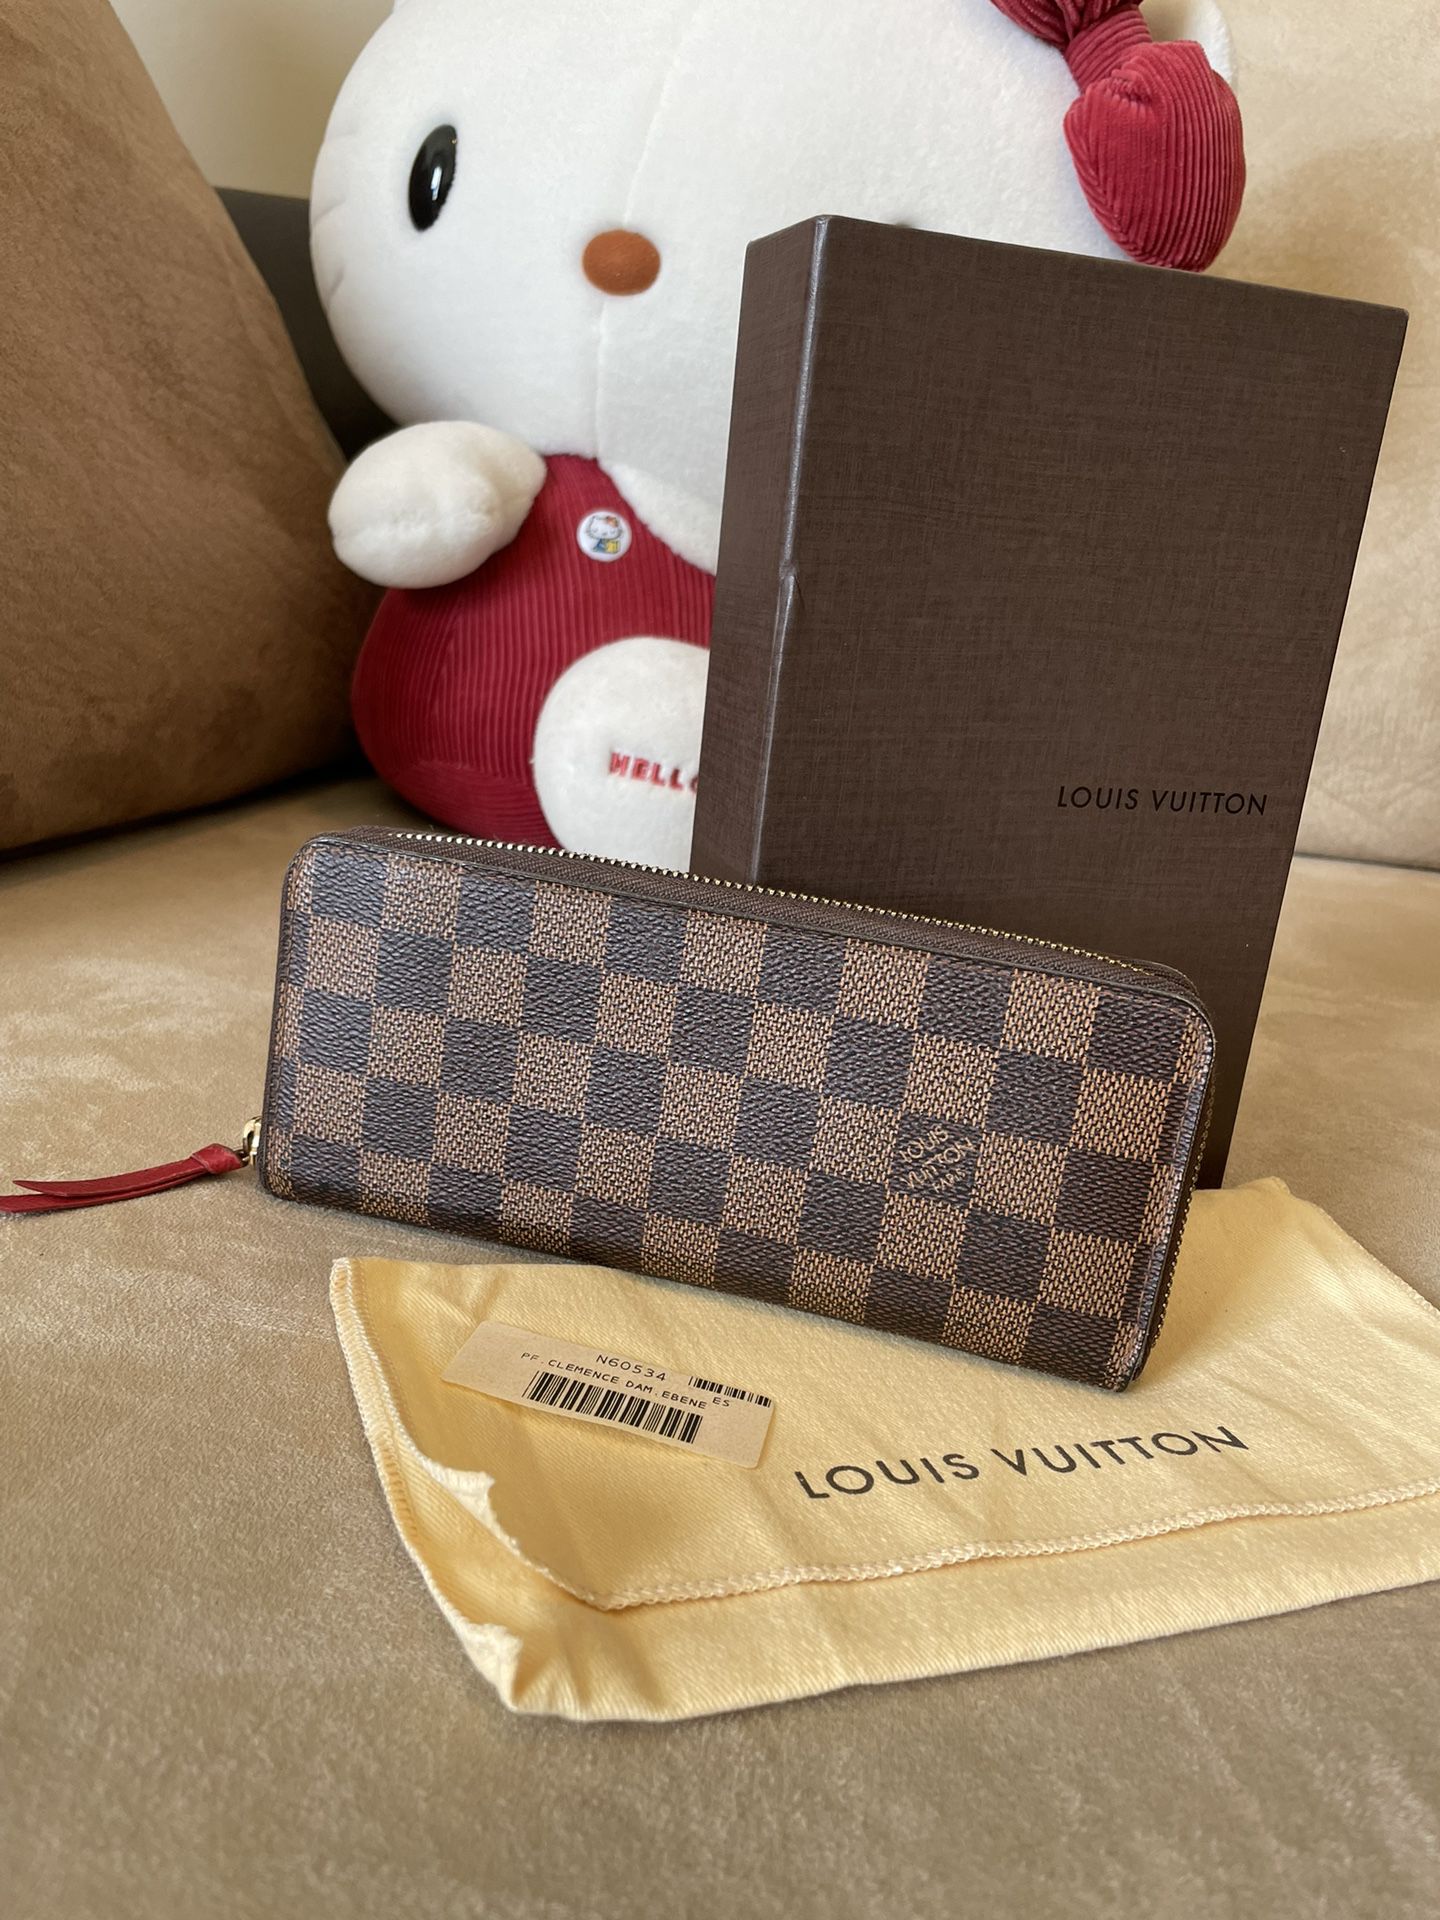 Authentic Louis Vuitton Clemence Wallet for Sale in Hiram, GA